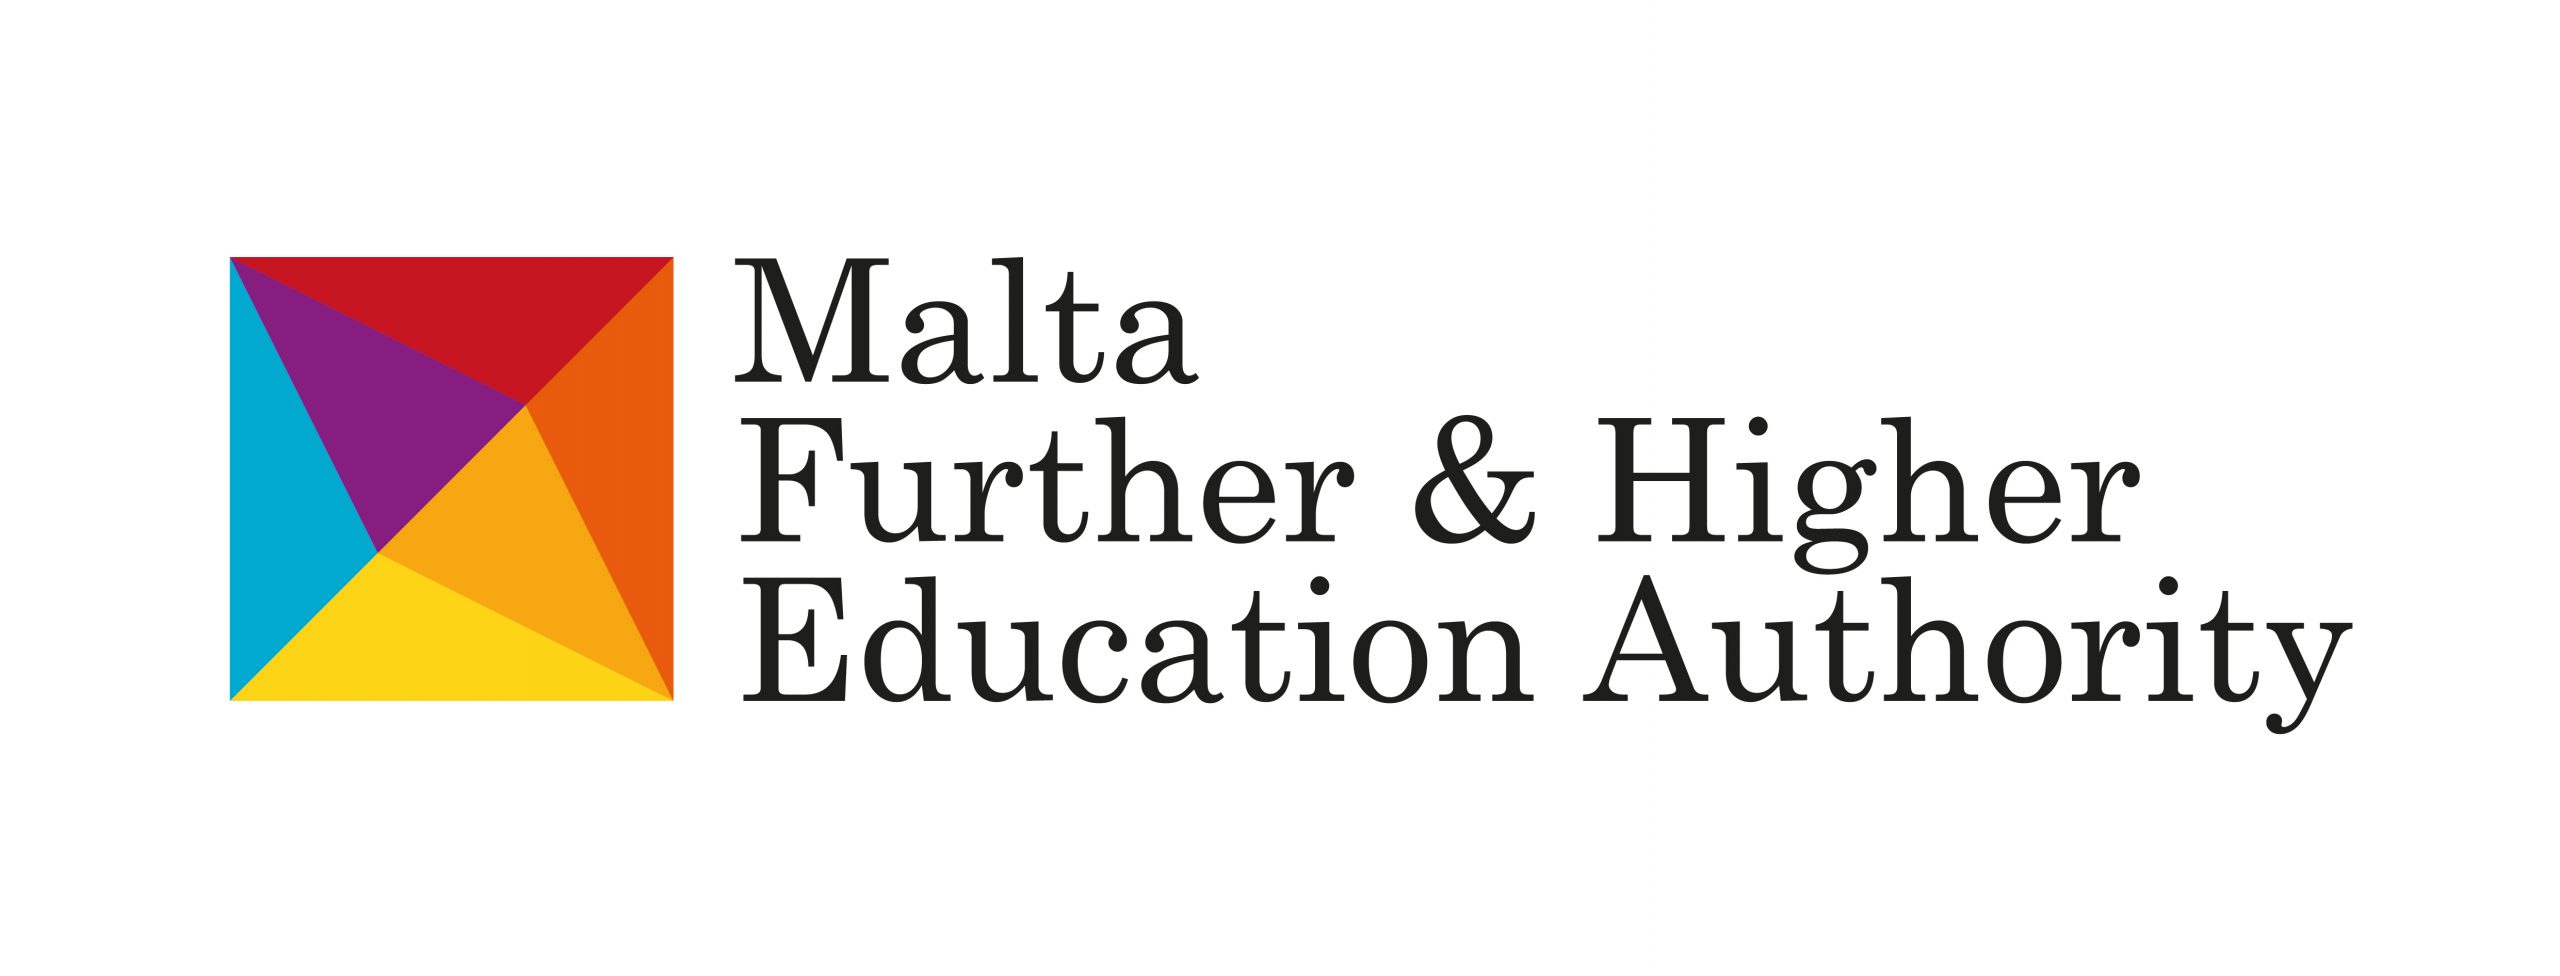 Malta Further & Higher Education Authority